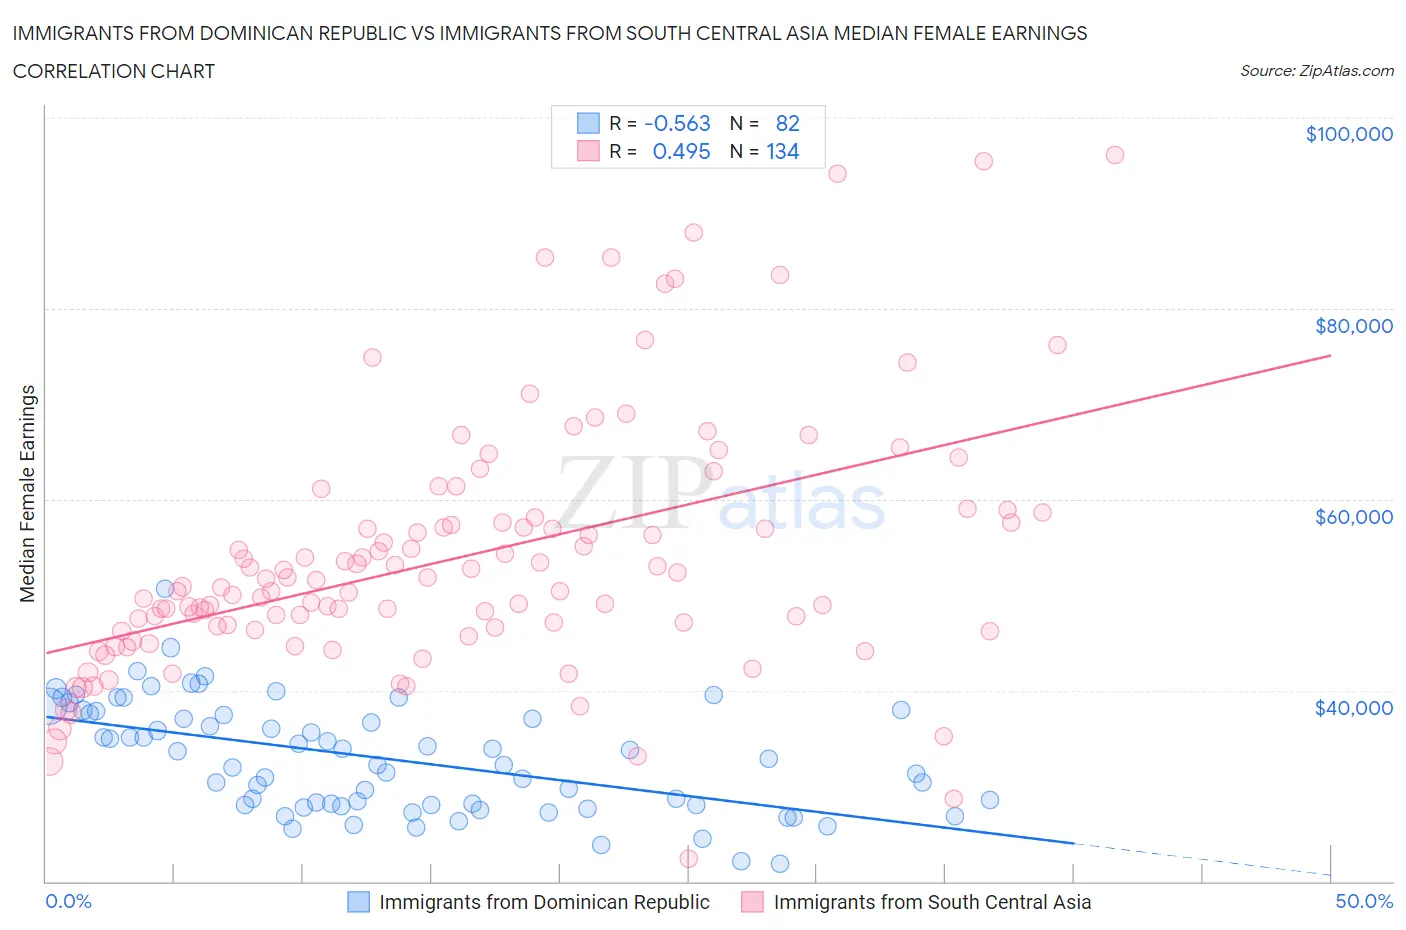 Immigrants from Dominican Republic vs Immigrants from South Central Asia Median Female Earnings